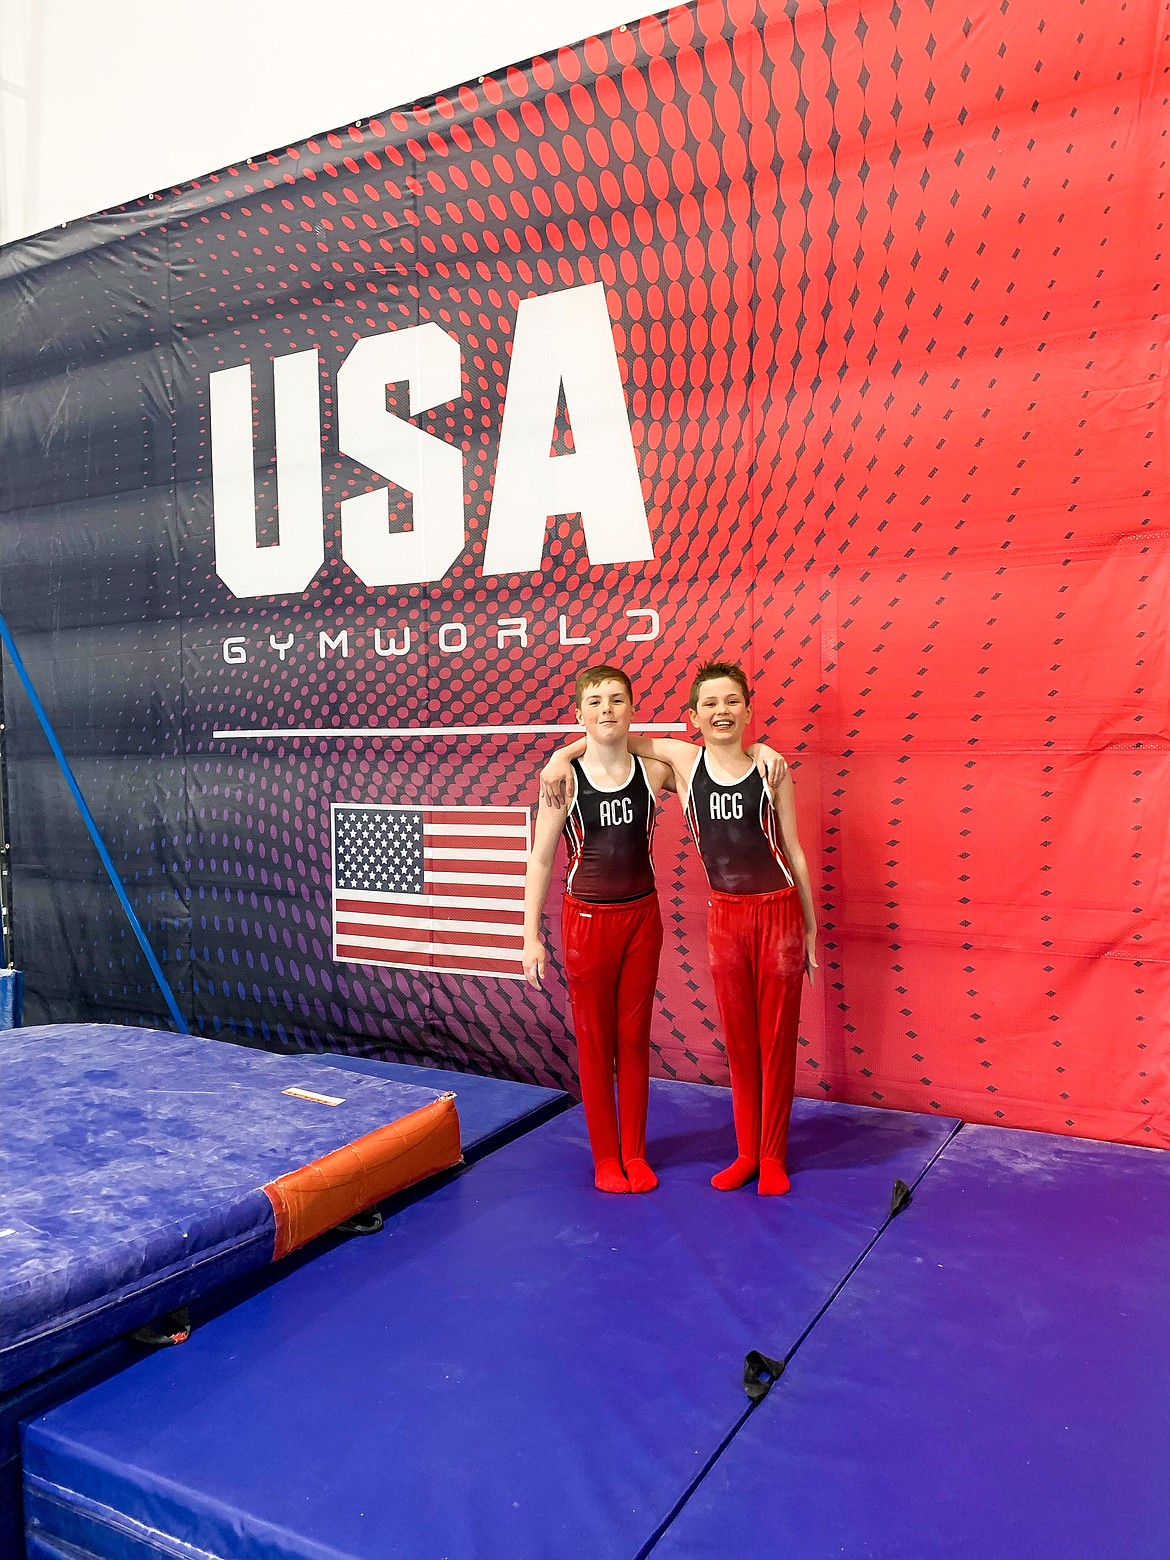 Courtesy photo
Avant Coeur boys Level 4s at the Idaho state gymnastics championships in Moscow. From left are Carson Kenny and Blaide Cotten.